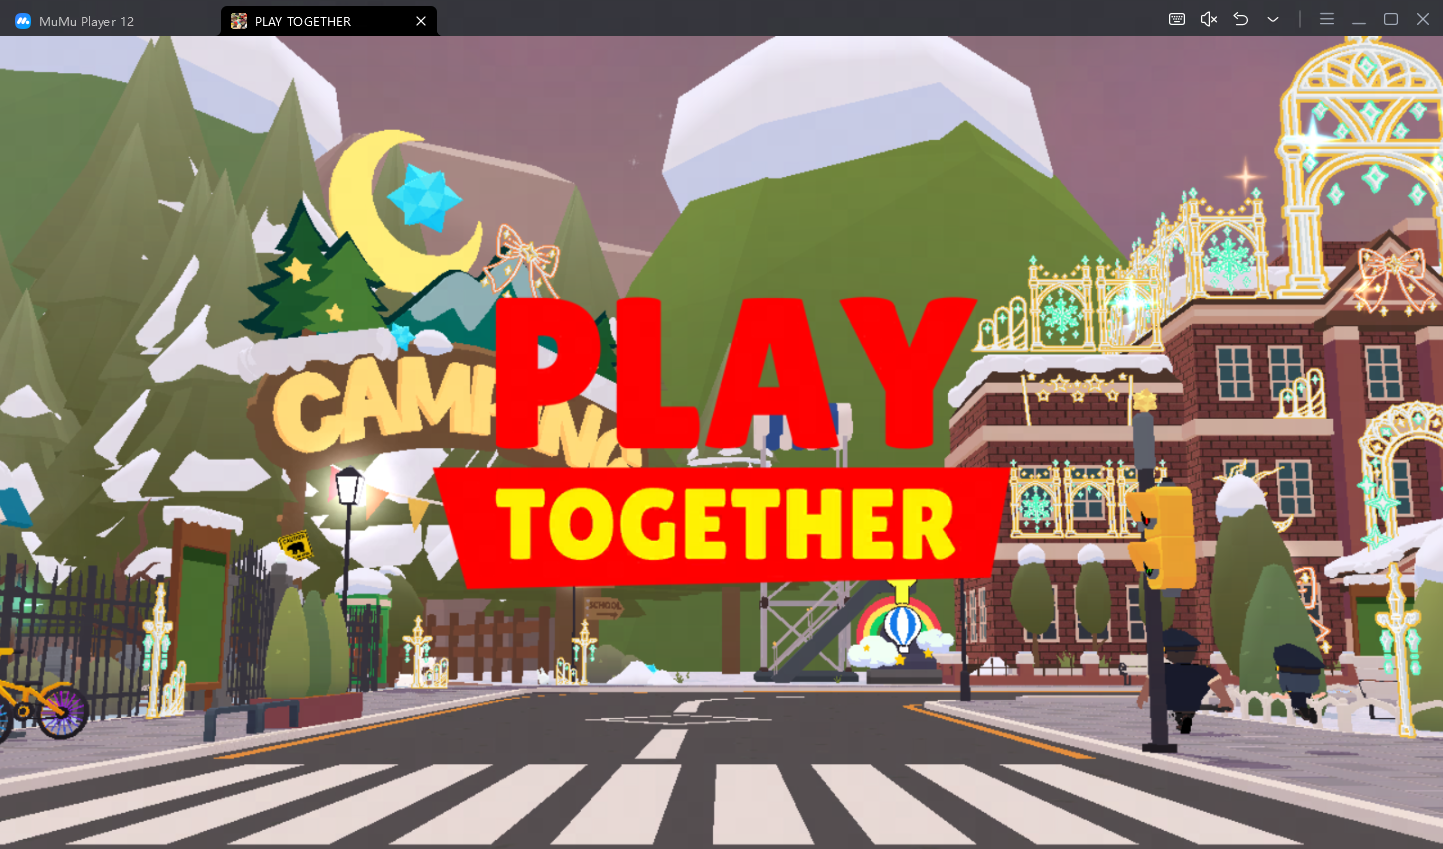 Download and play walkthrough new People : Playground on PC with MuMu Player